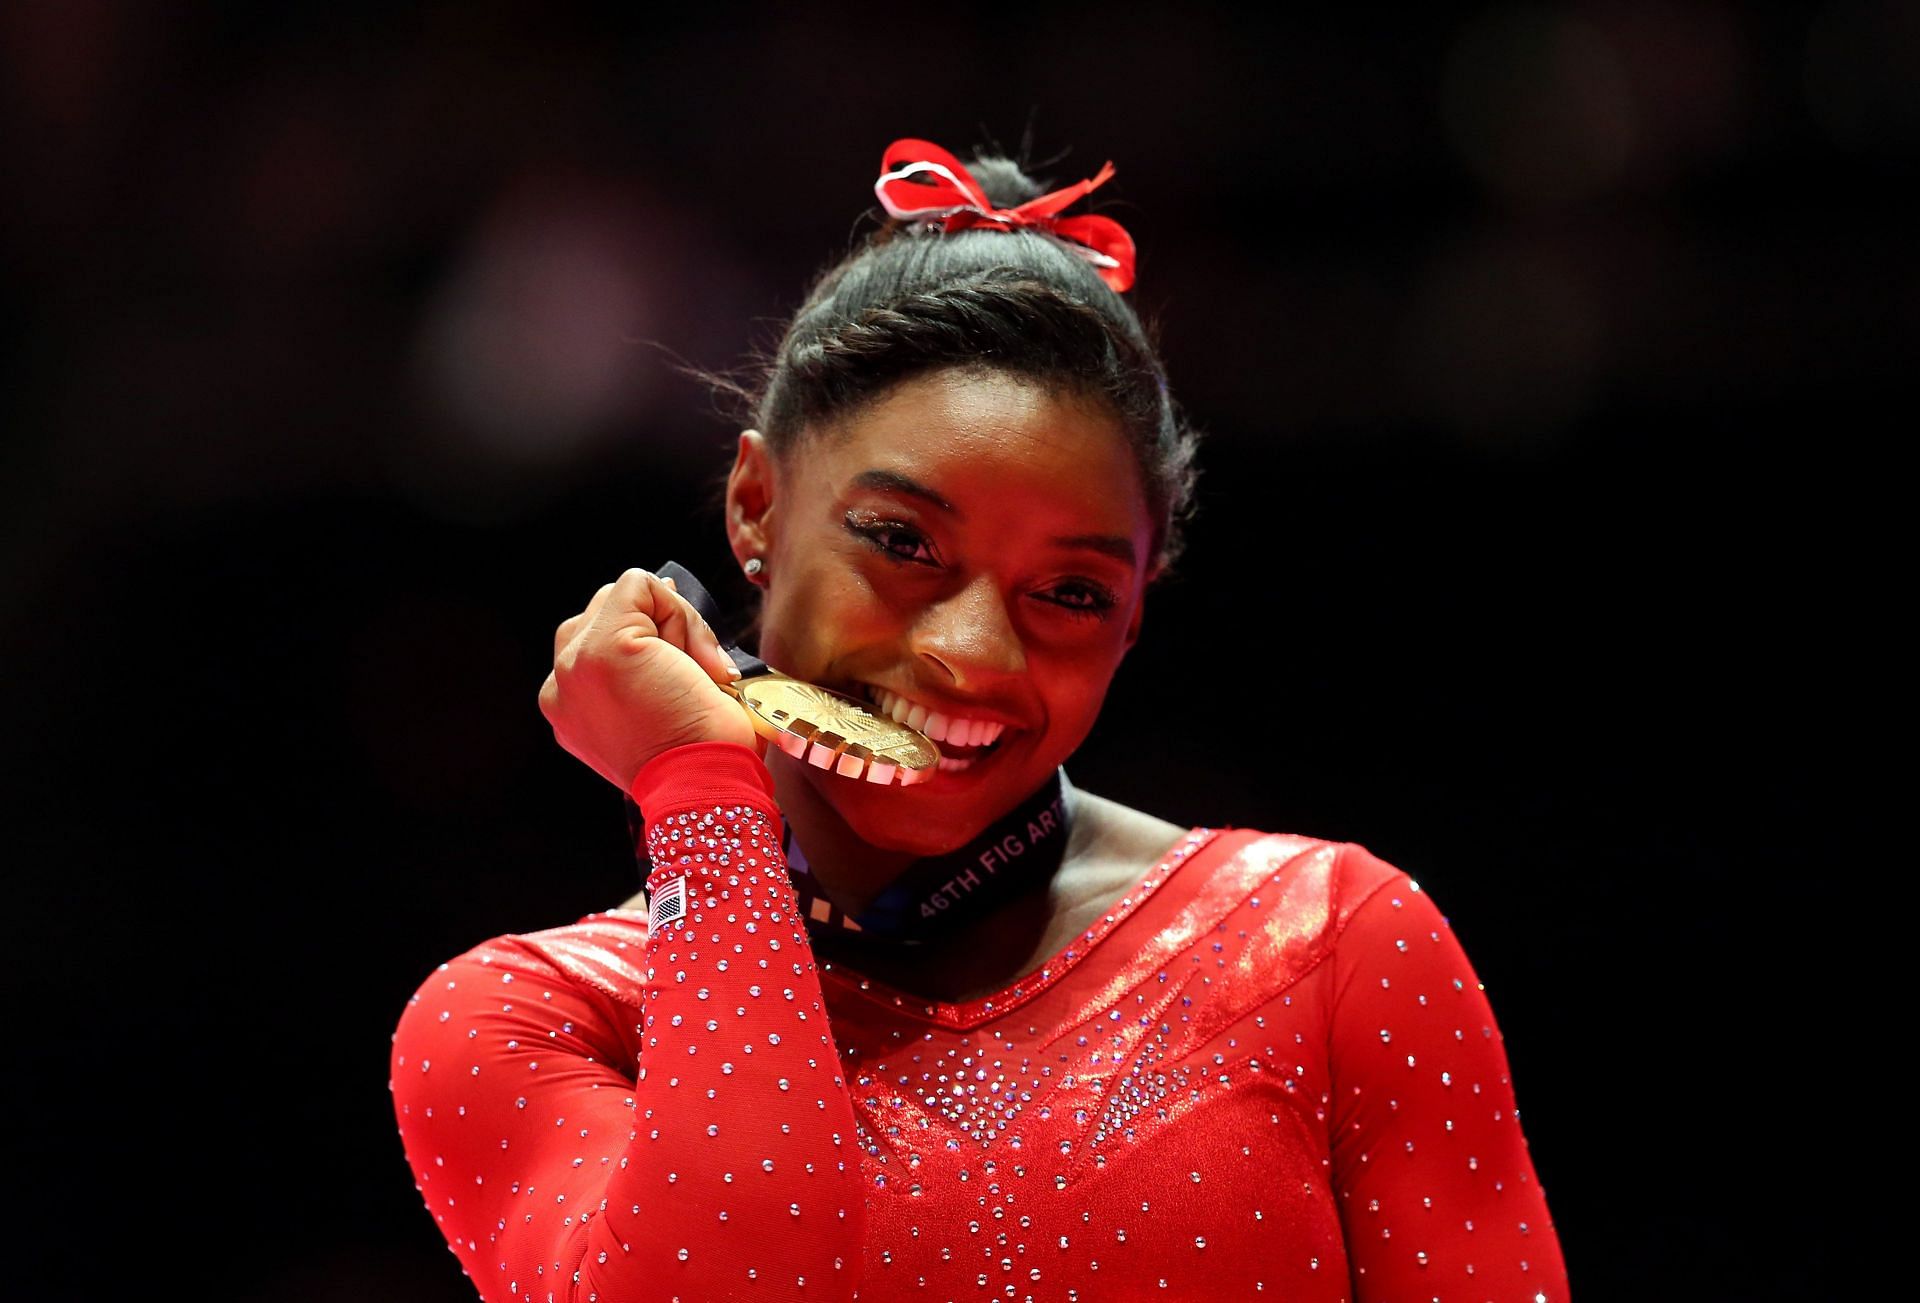 Biles poses with the Gold medal after winning the All-Around Final at the 2015 World Artistic Gymnastics Championships